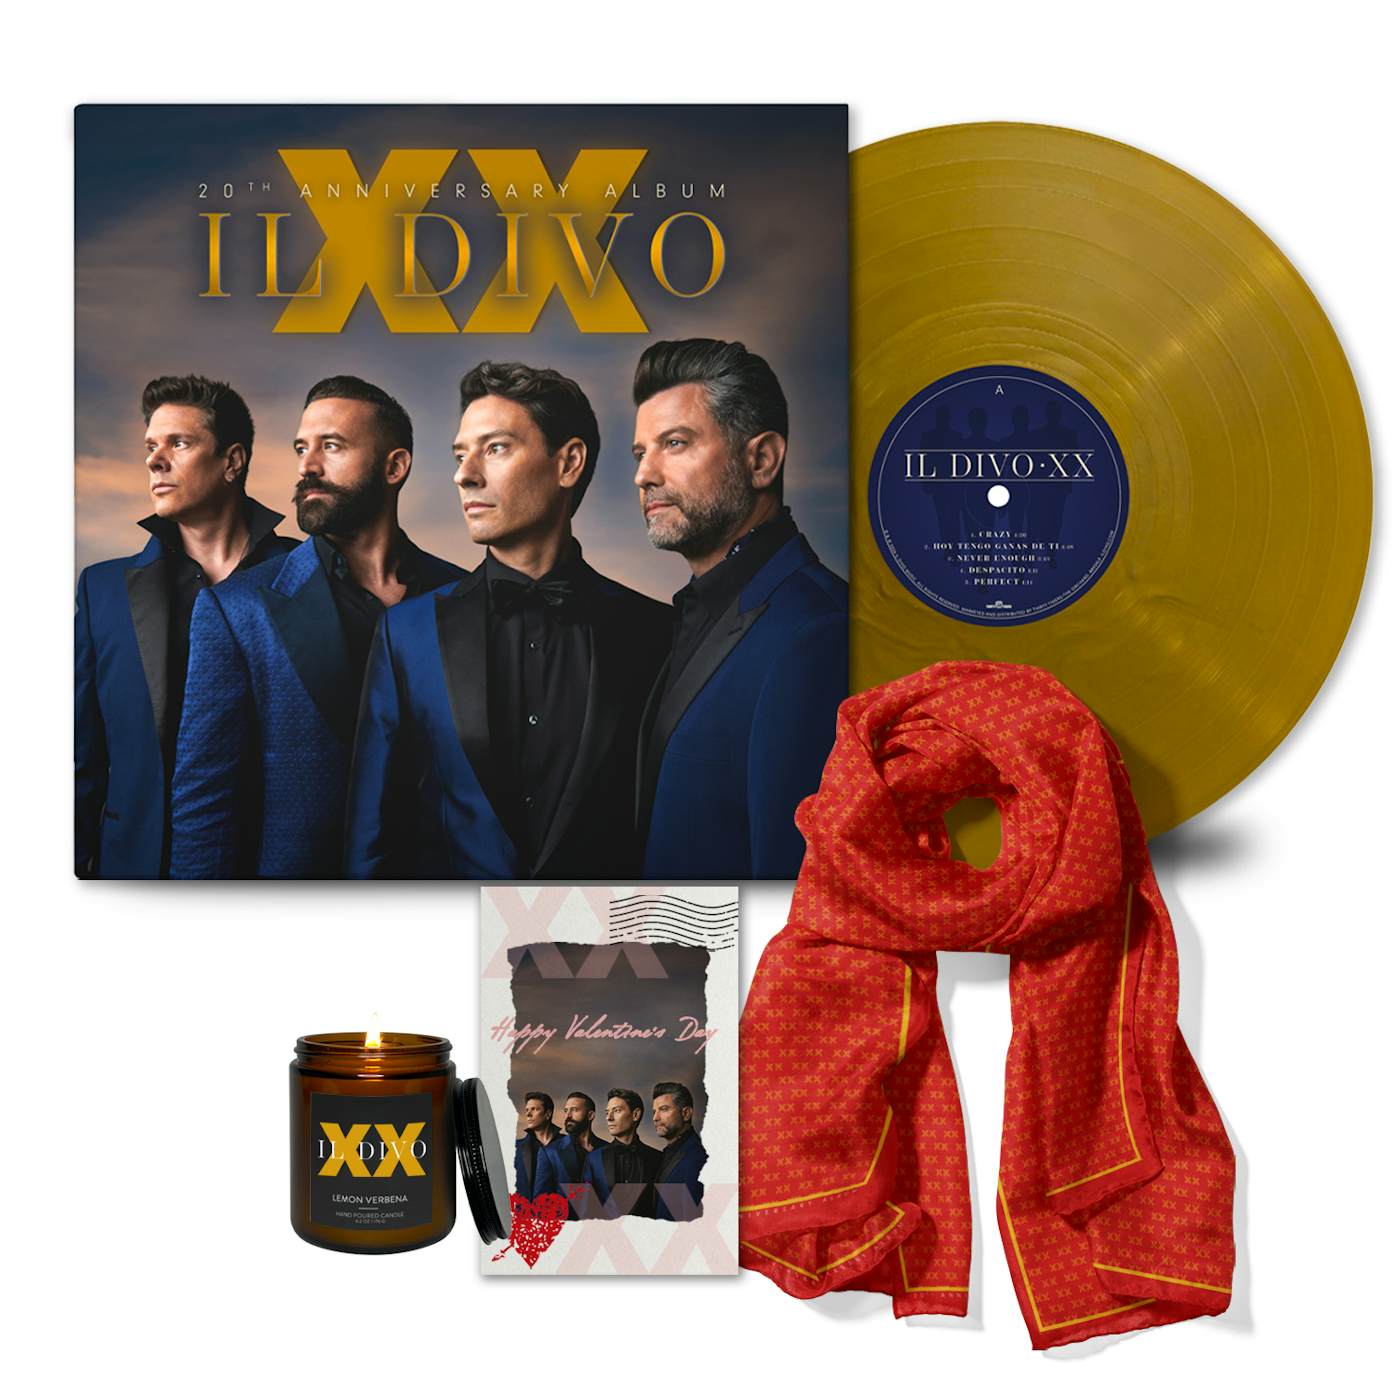 Il Divo XX Gold Vinyl + Signed Valentine’s Day Card + XX Scarf + XX Candle